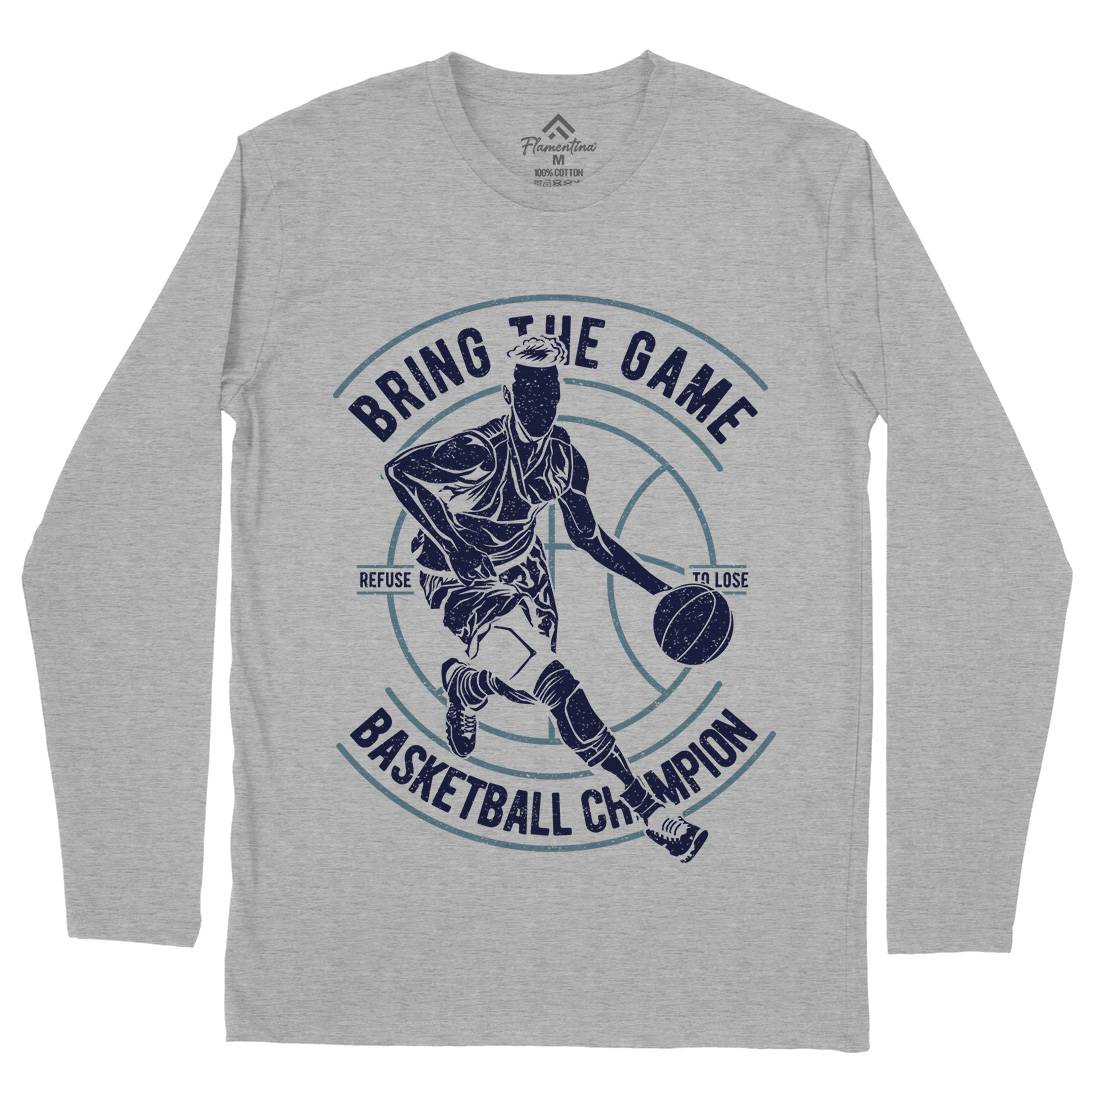 Bring The Game Mens Long Sleeve T-Shirt Sport A627